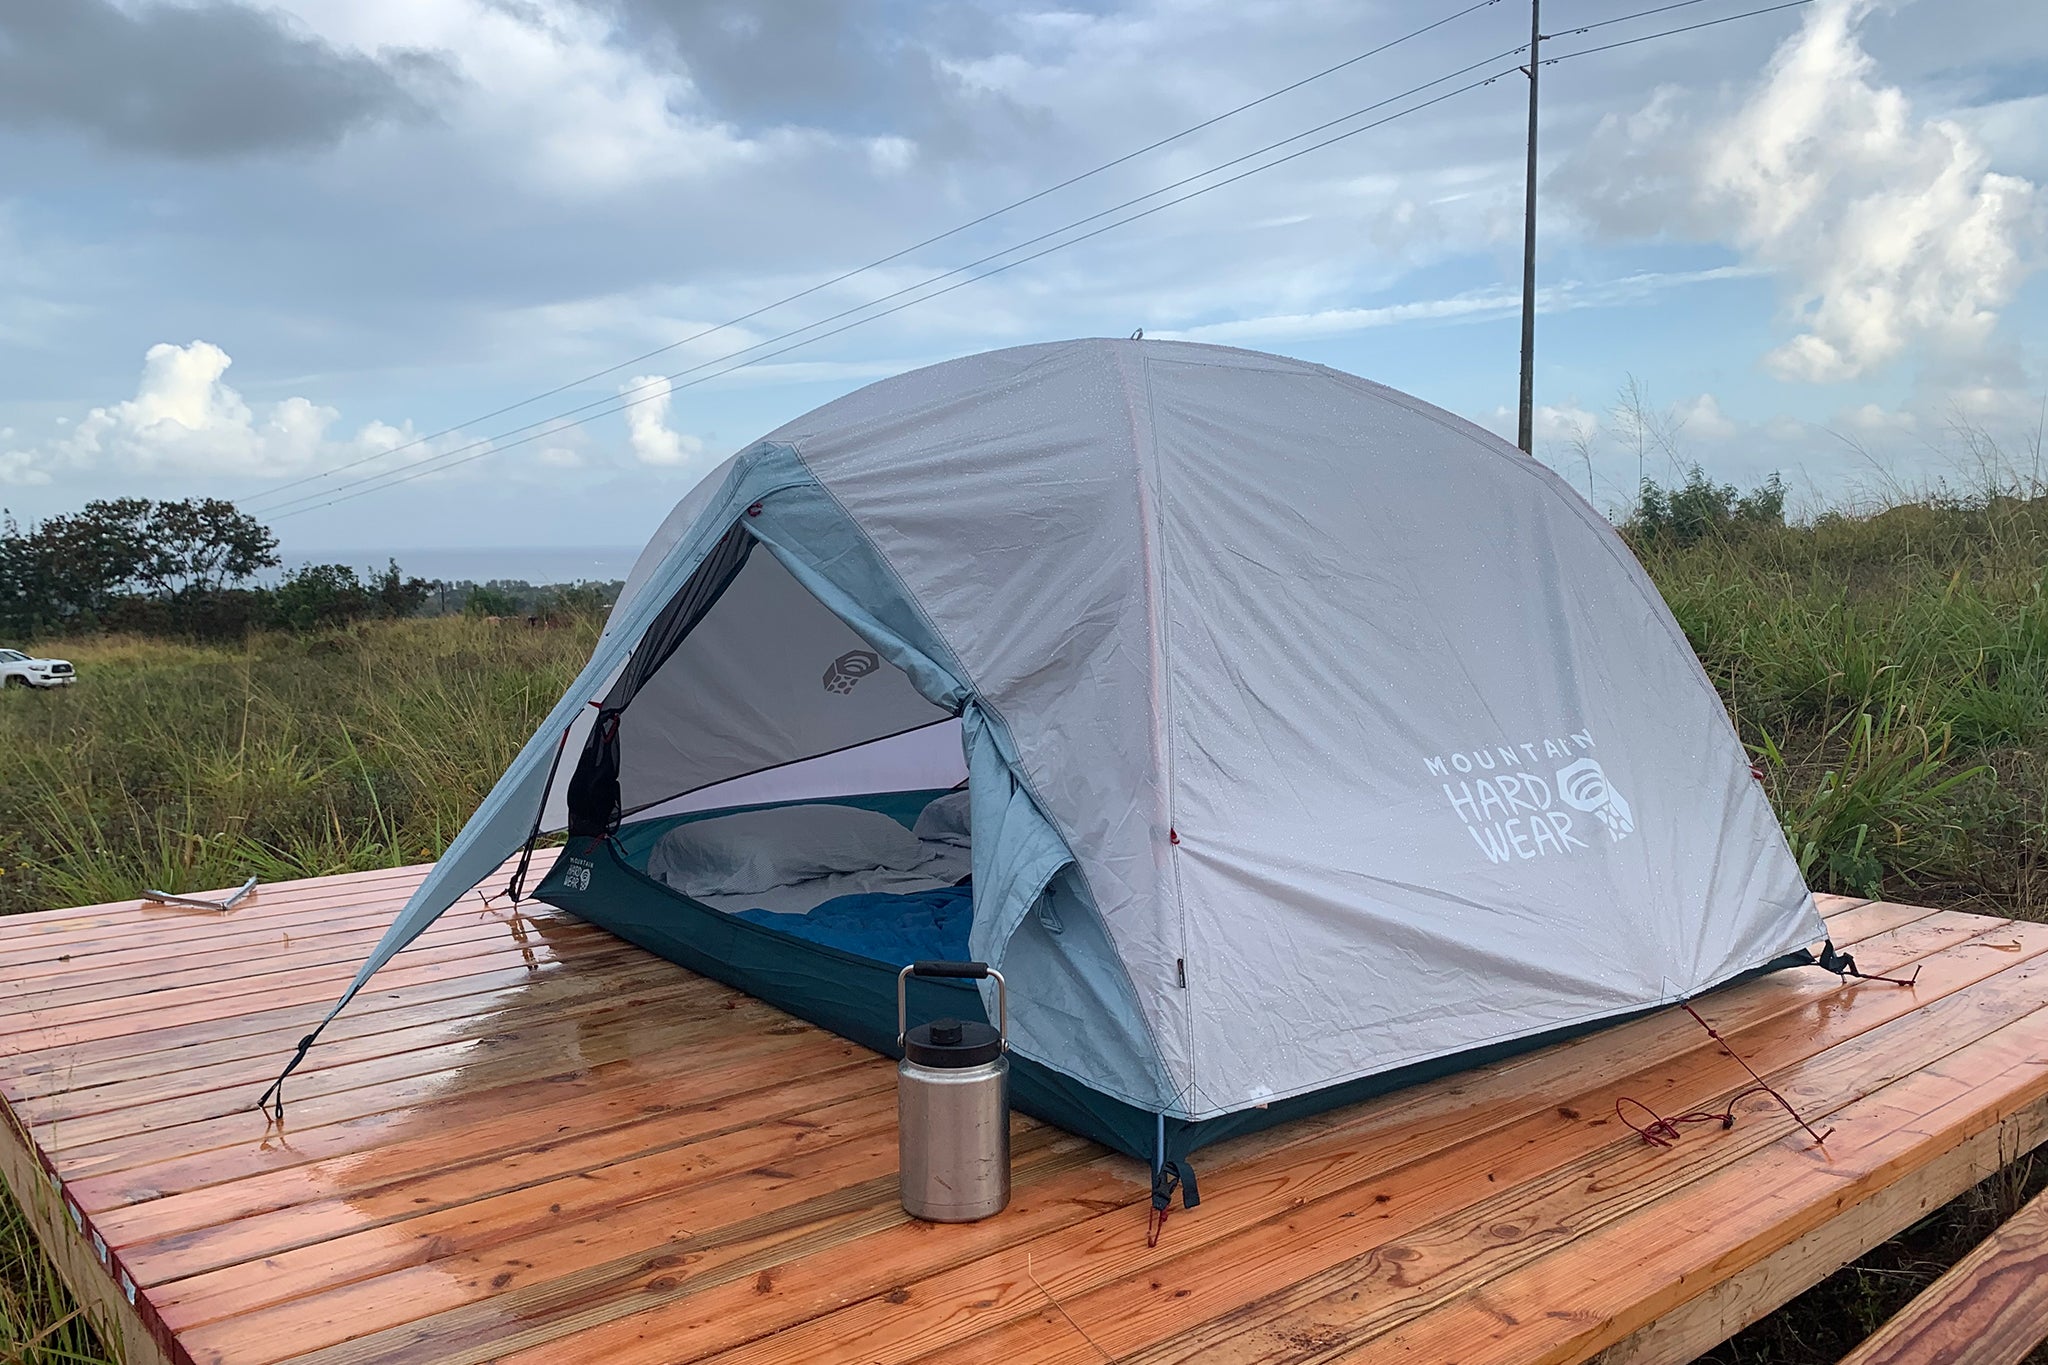 Where Can I Find Tutorials on Repairing Outdoor Equipment Like Tents?